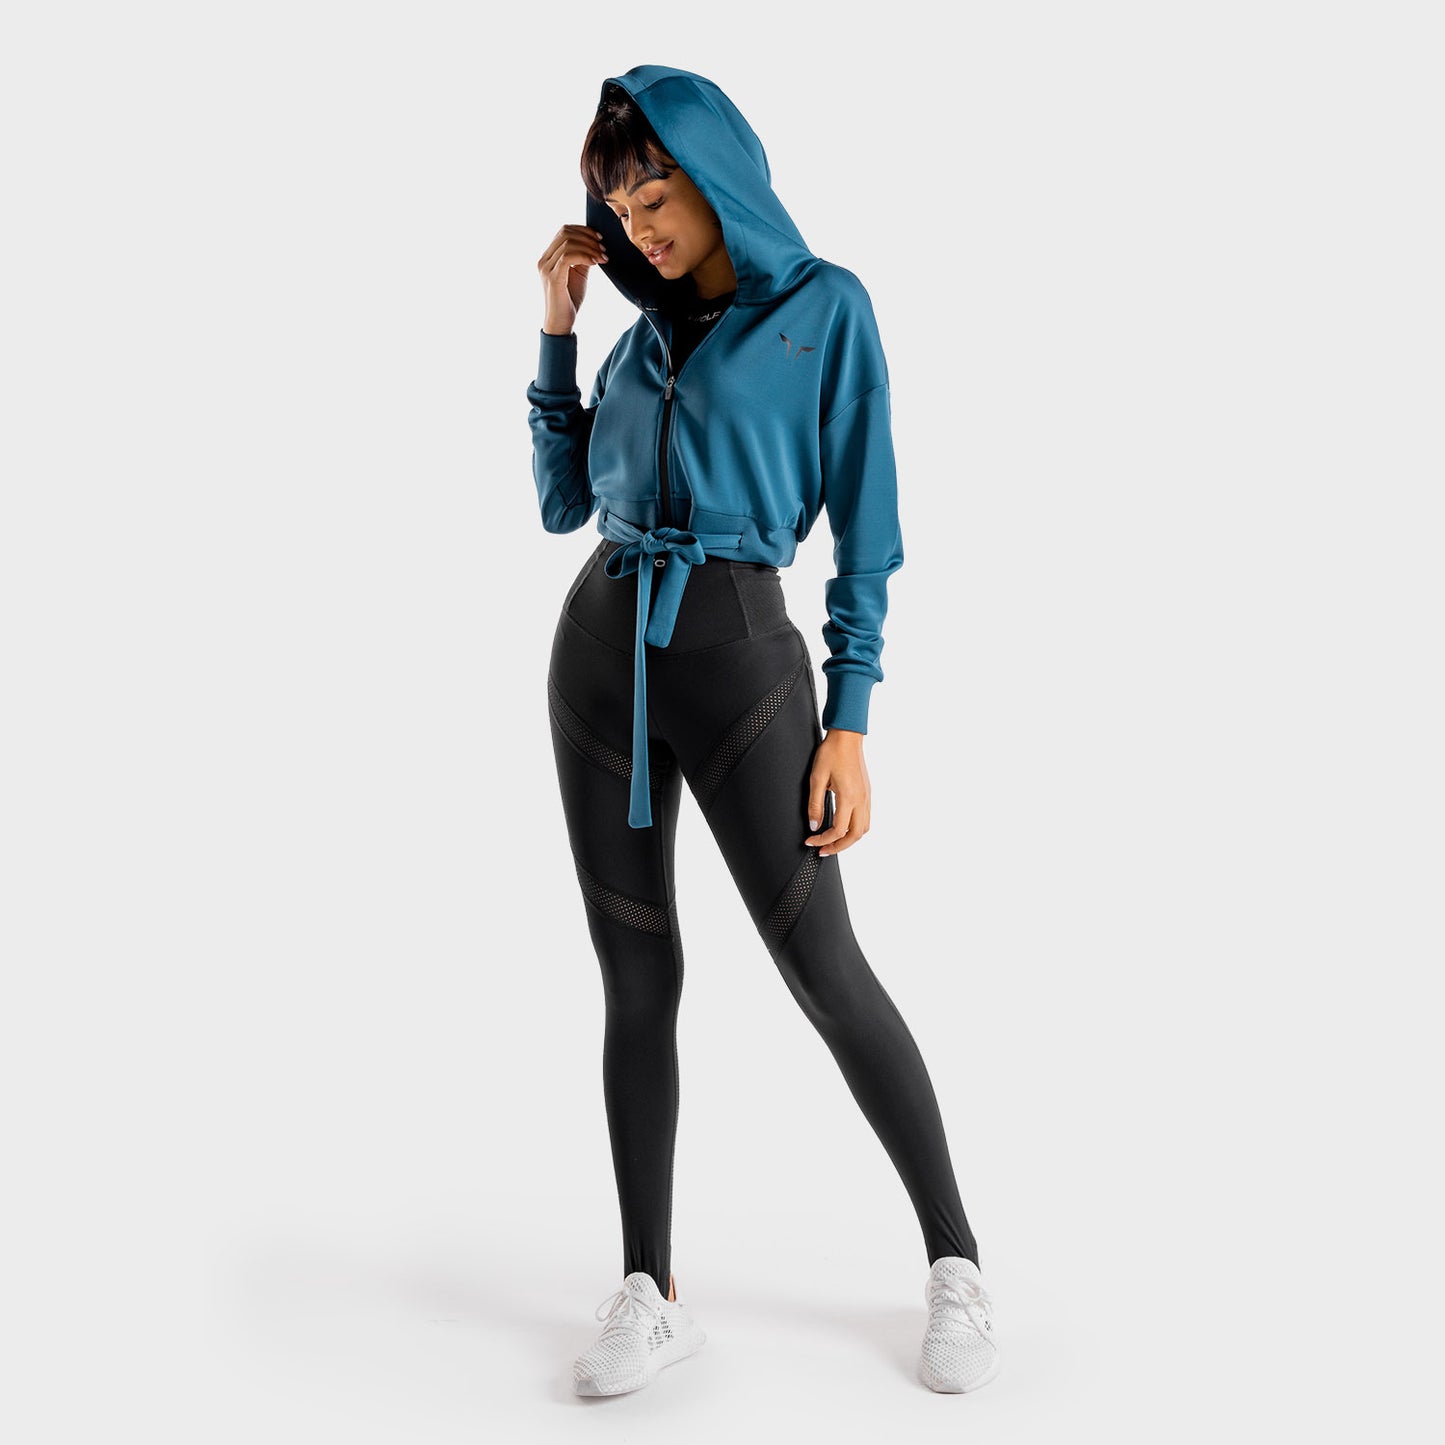 squatwolf-gym-hoodies-women-do-knot-hoodie-teal-workout-clothes